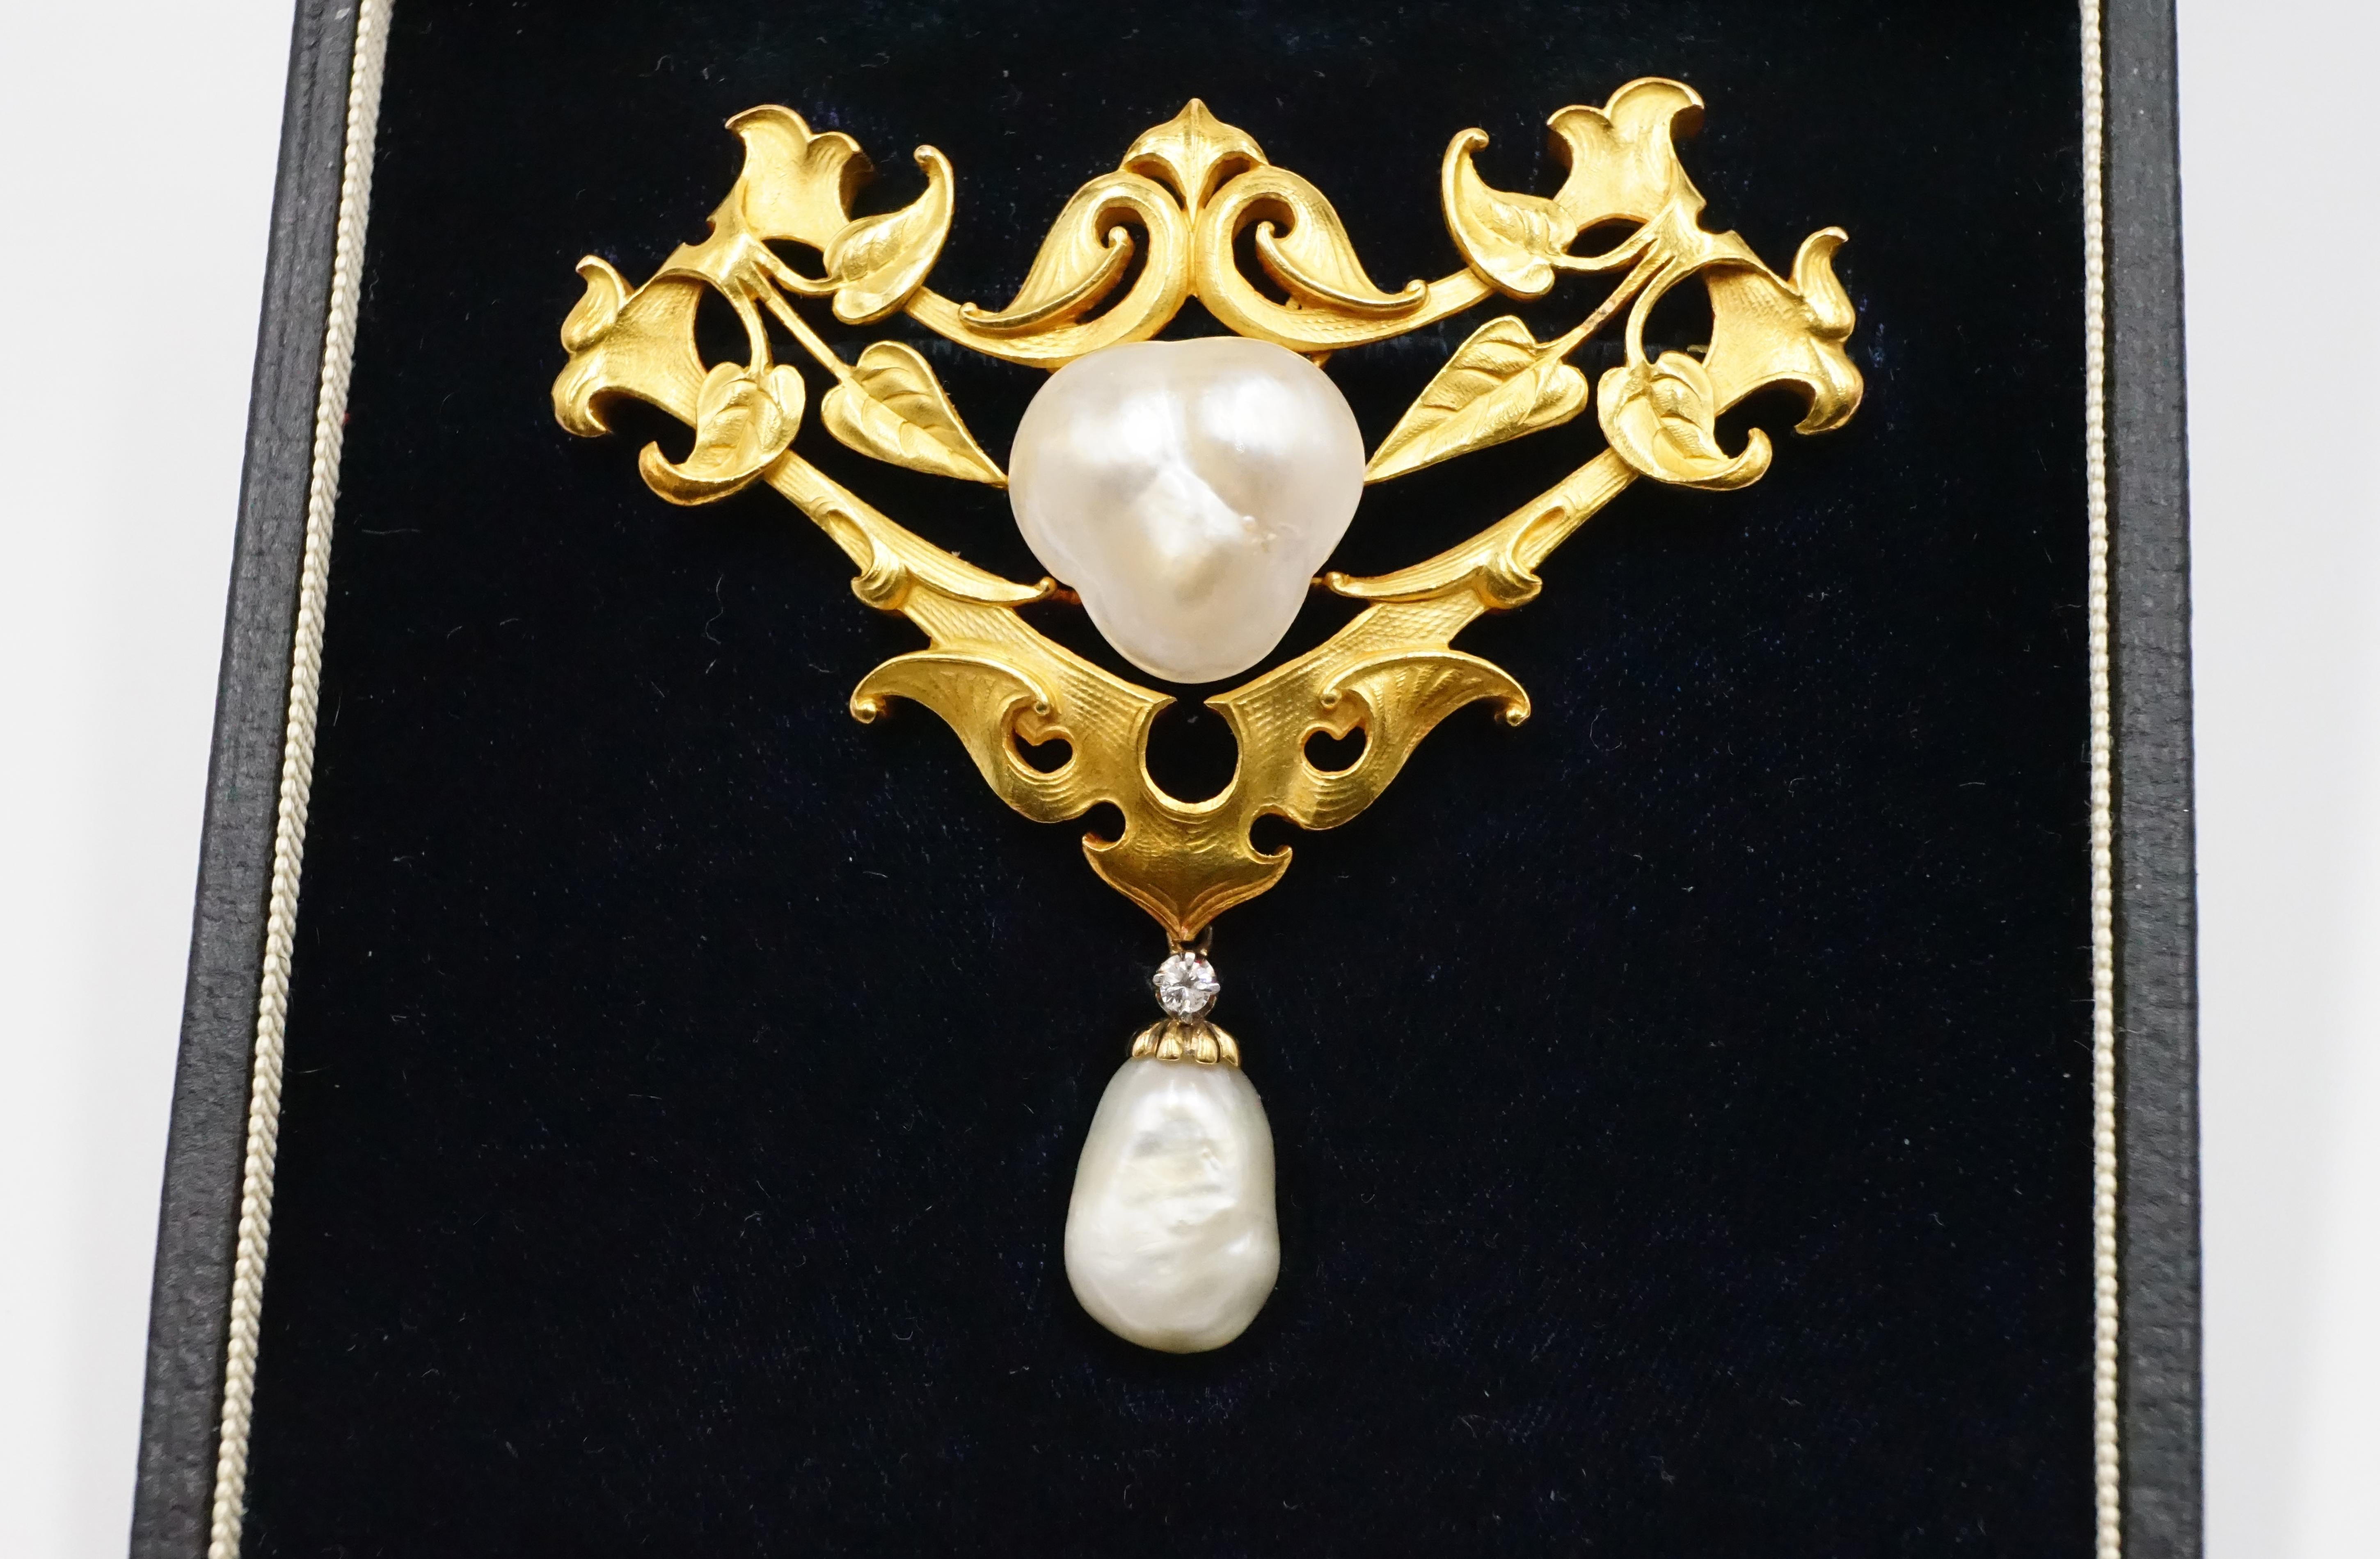 An elegant Art Nouveau natural pearl, gold and brilliant cut diamond brooch, both pearls are natural the heart-shaped pearl measures W:1.6cm H:1.55cm D: approx 0.7cm and the drop pearl measures W: 1.3cm H:1cm D: 0.7cm both certificates are